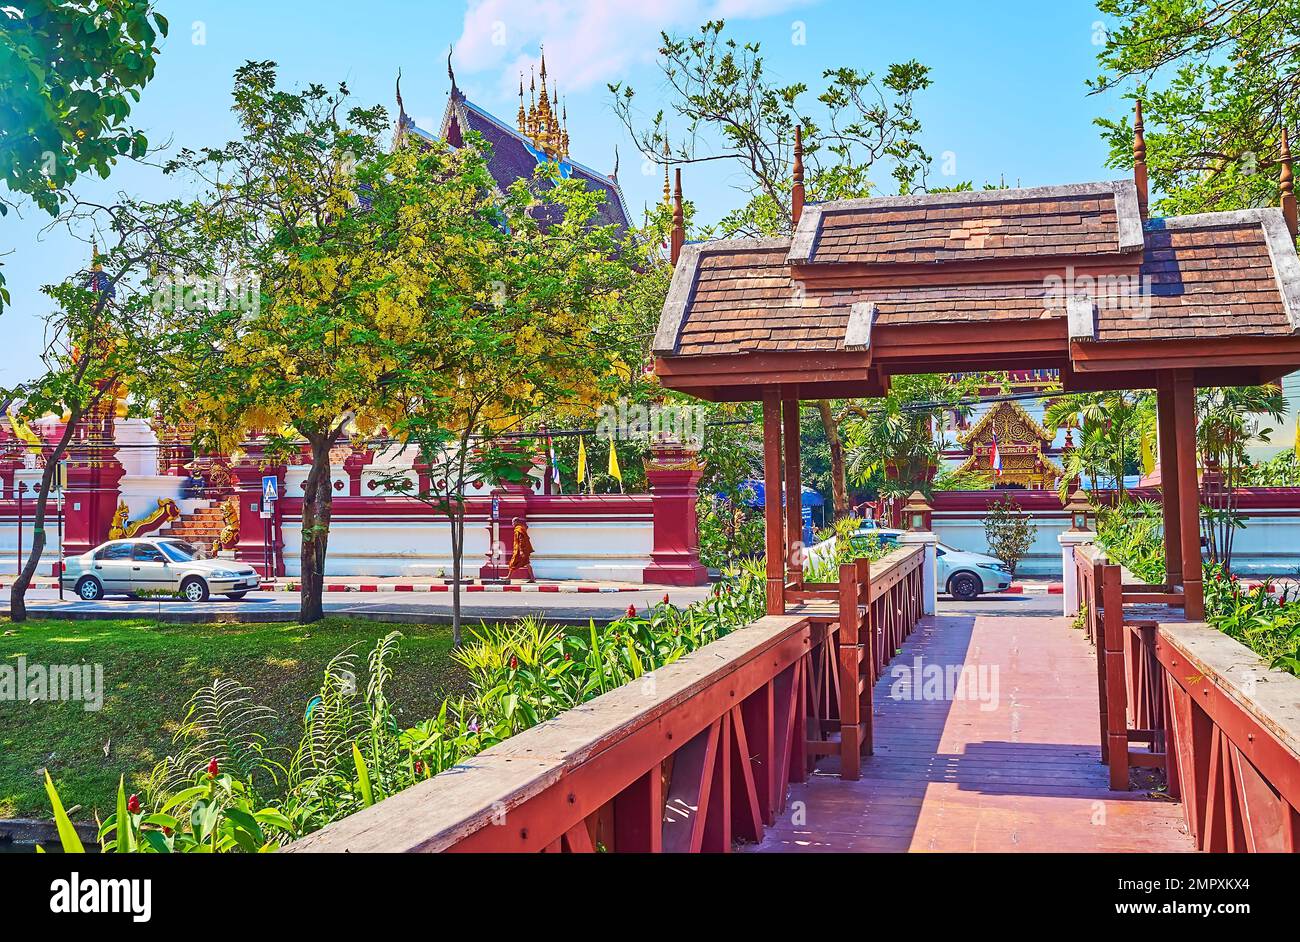 Walk down the wooden footbridge across the Old City Moat, surrounded with lush green park with blooming caragana trees, Chiang Mai, Thailand Stock Photo